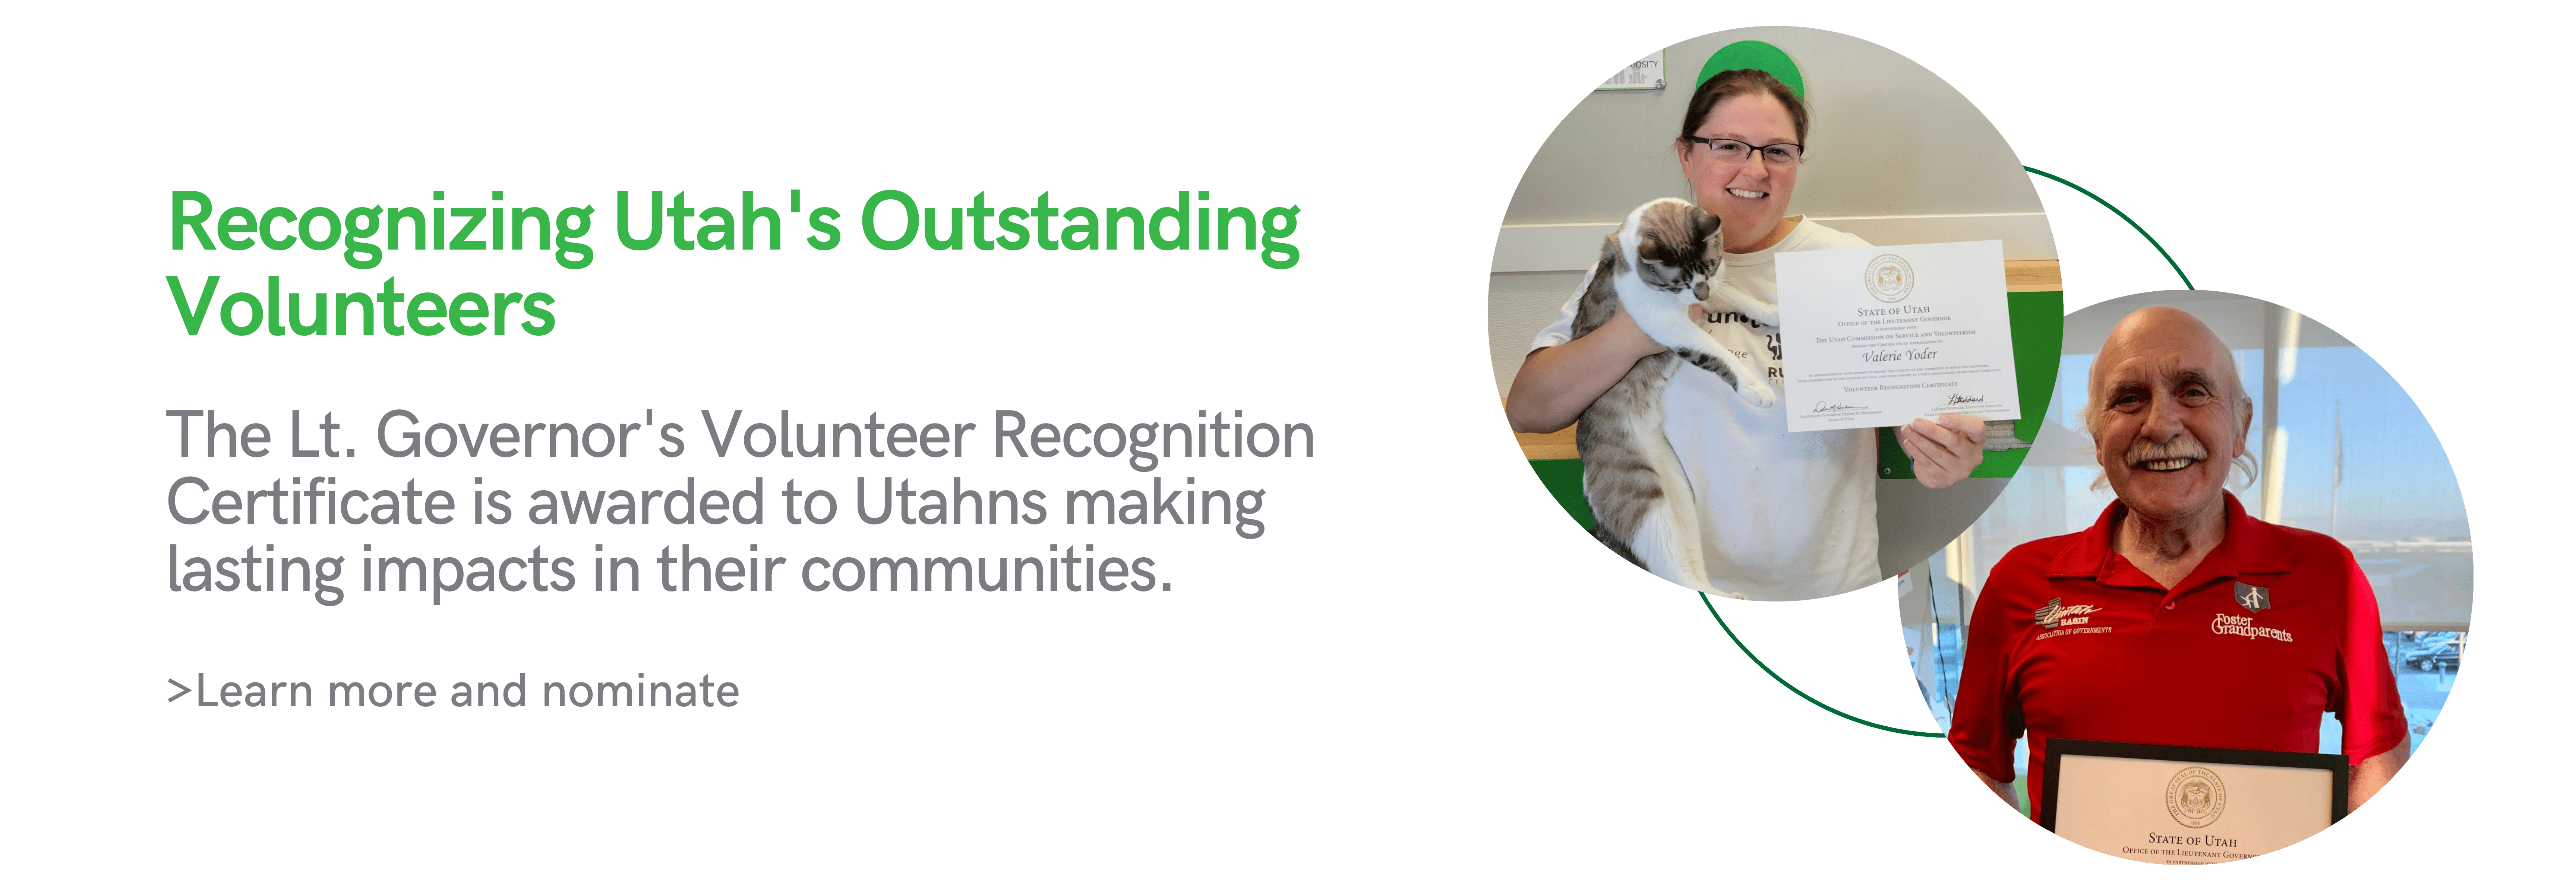 Recognizing Utah's Outstanding Volunteers. The Lt. Governor's Volunteer Recognition Certificate is awarded to Utahns making lasting impacts in their communities. >Learn more and nominate